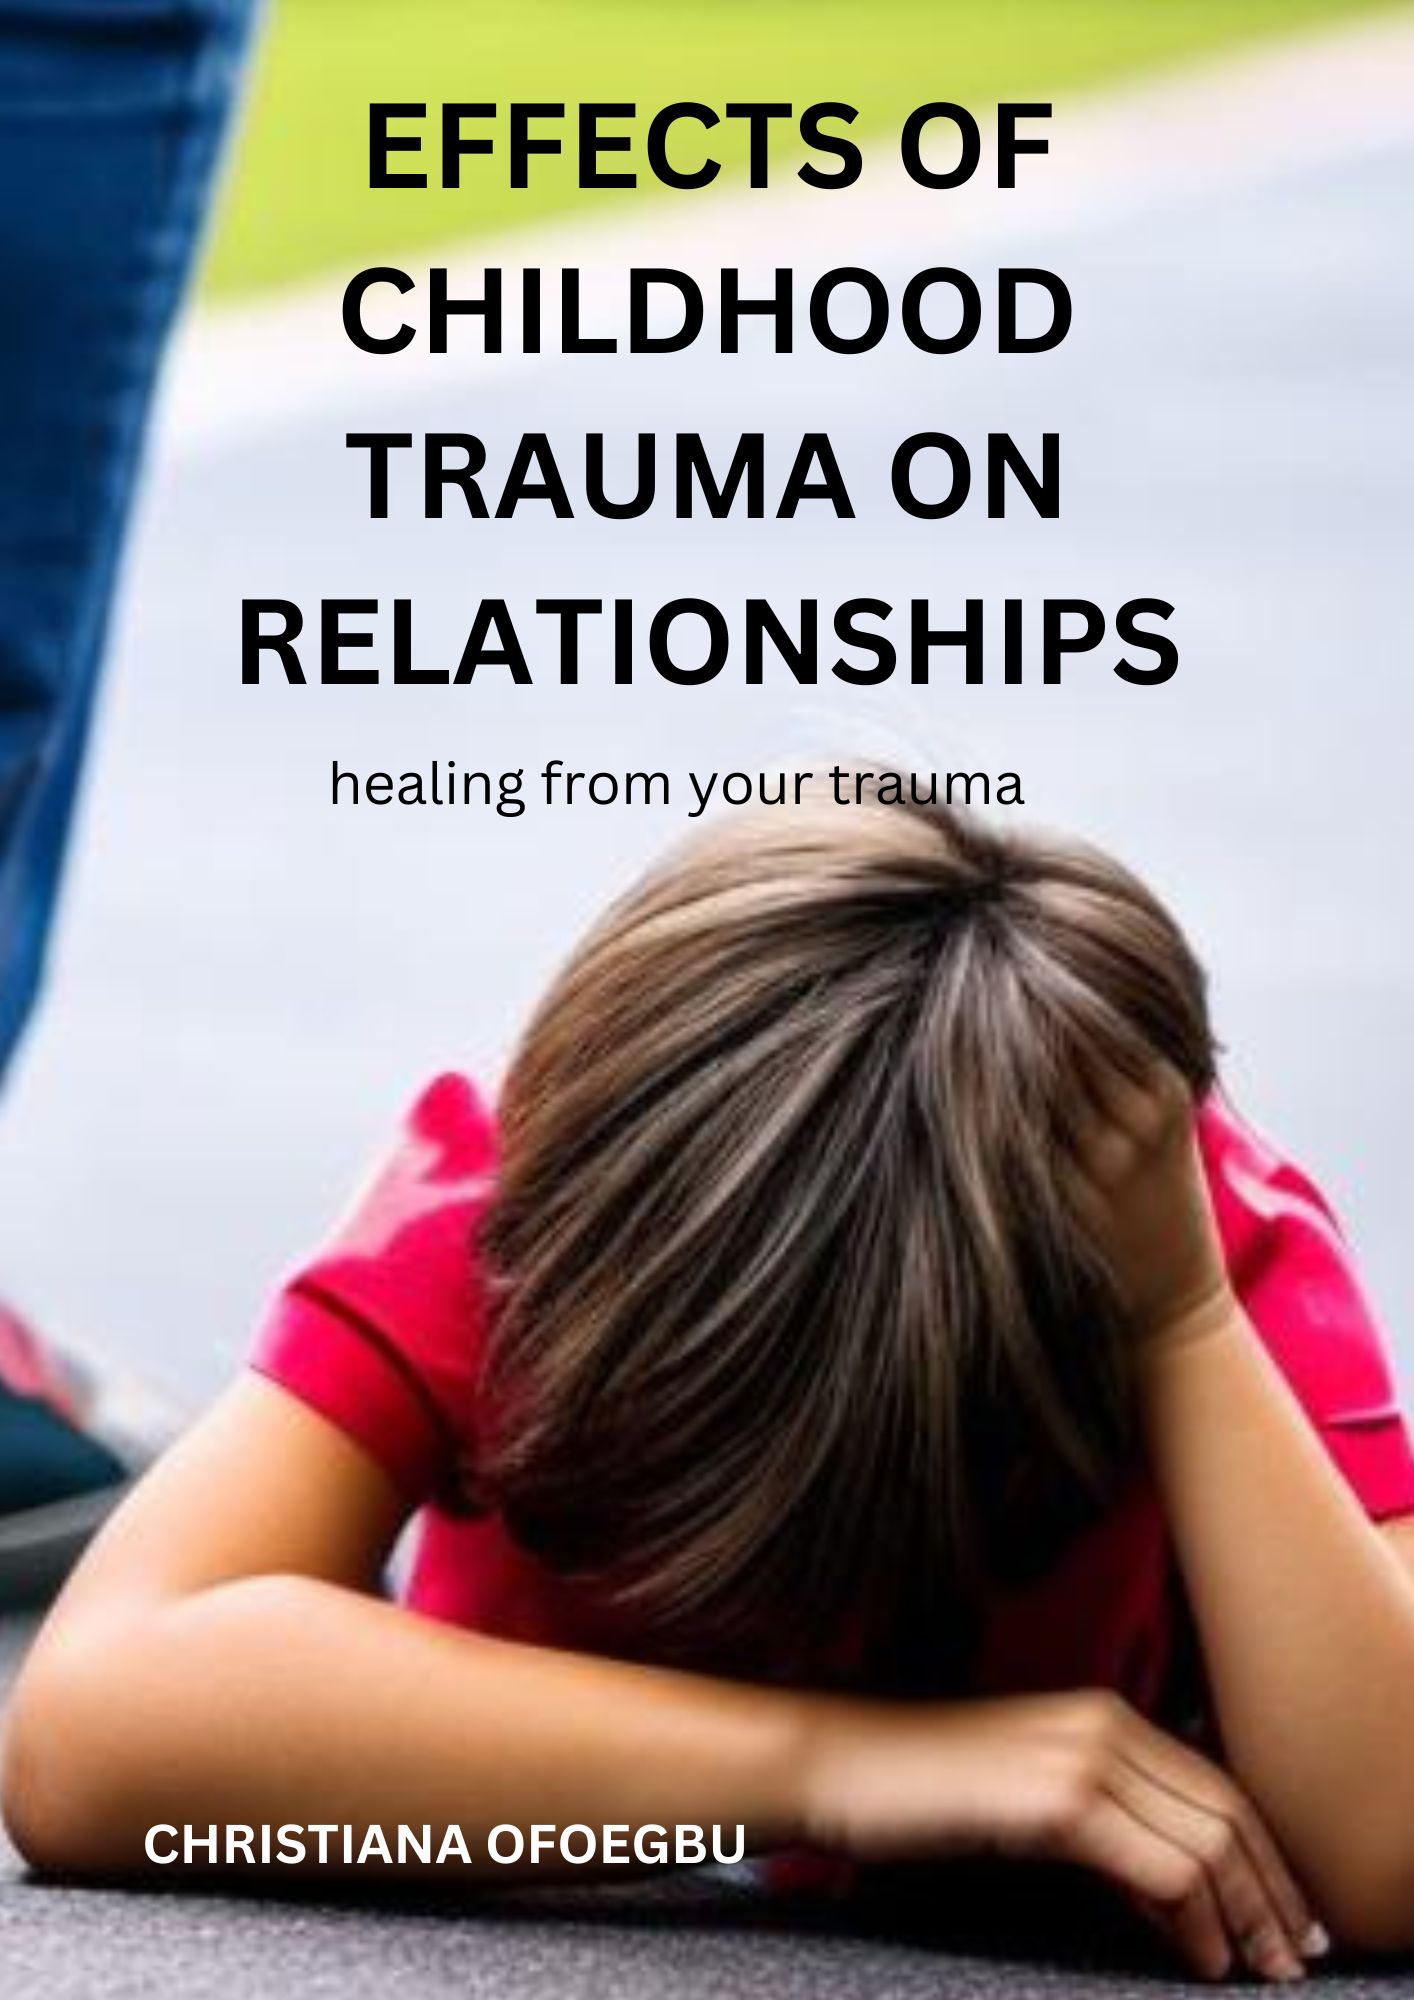 Effects-of-Childhood-Trauma-on-Relationship--Healing-From-Your-Trauma